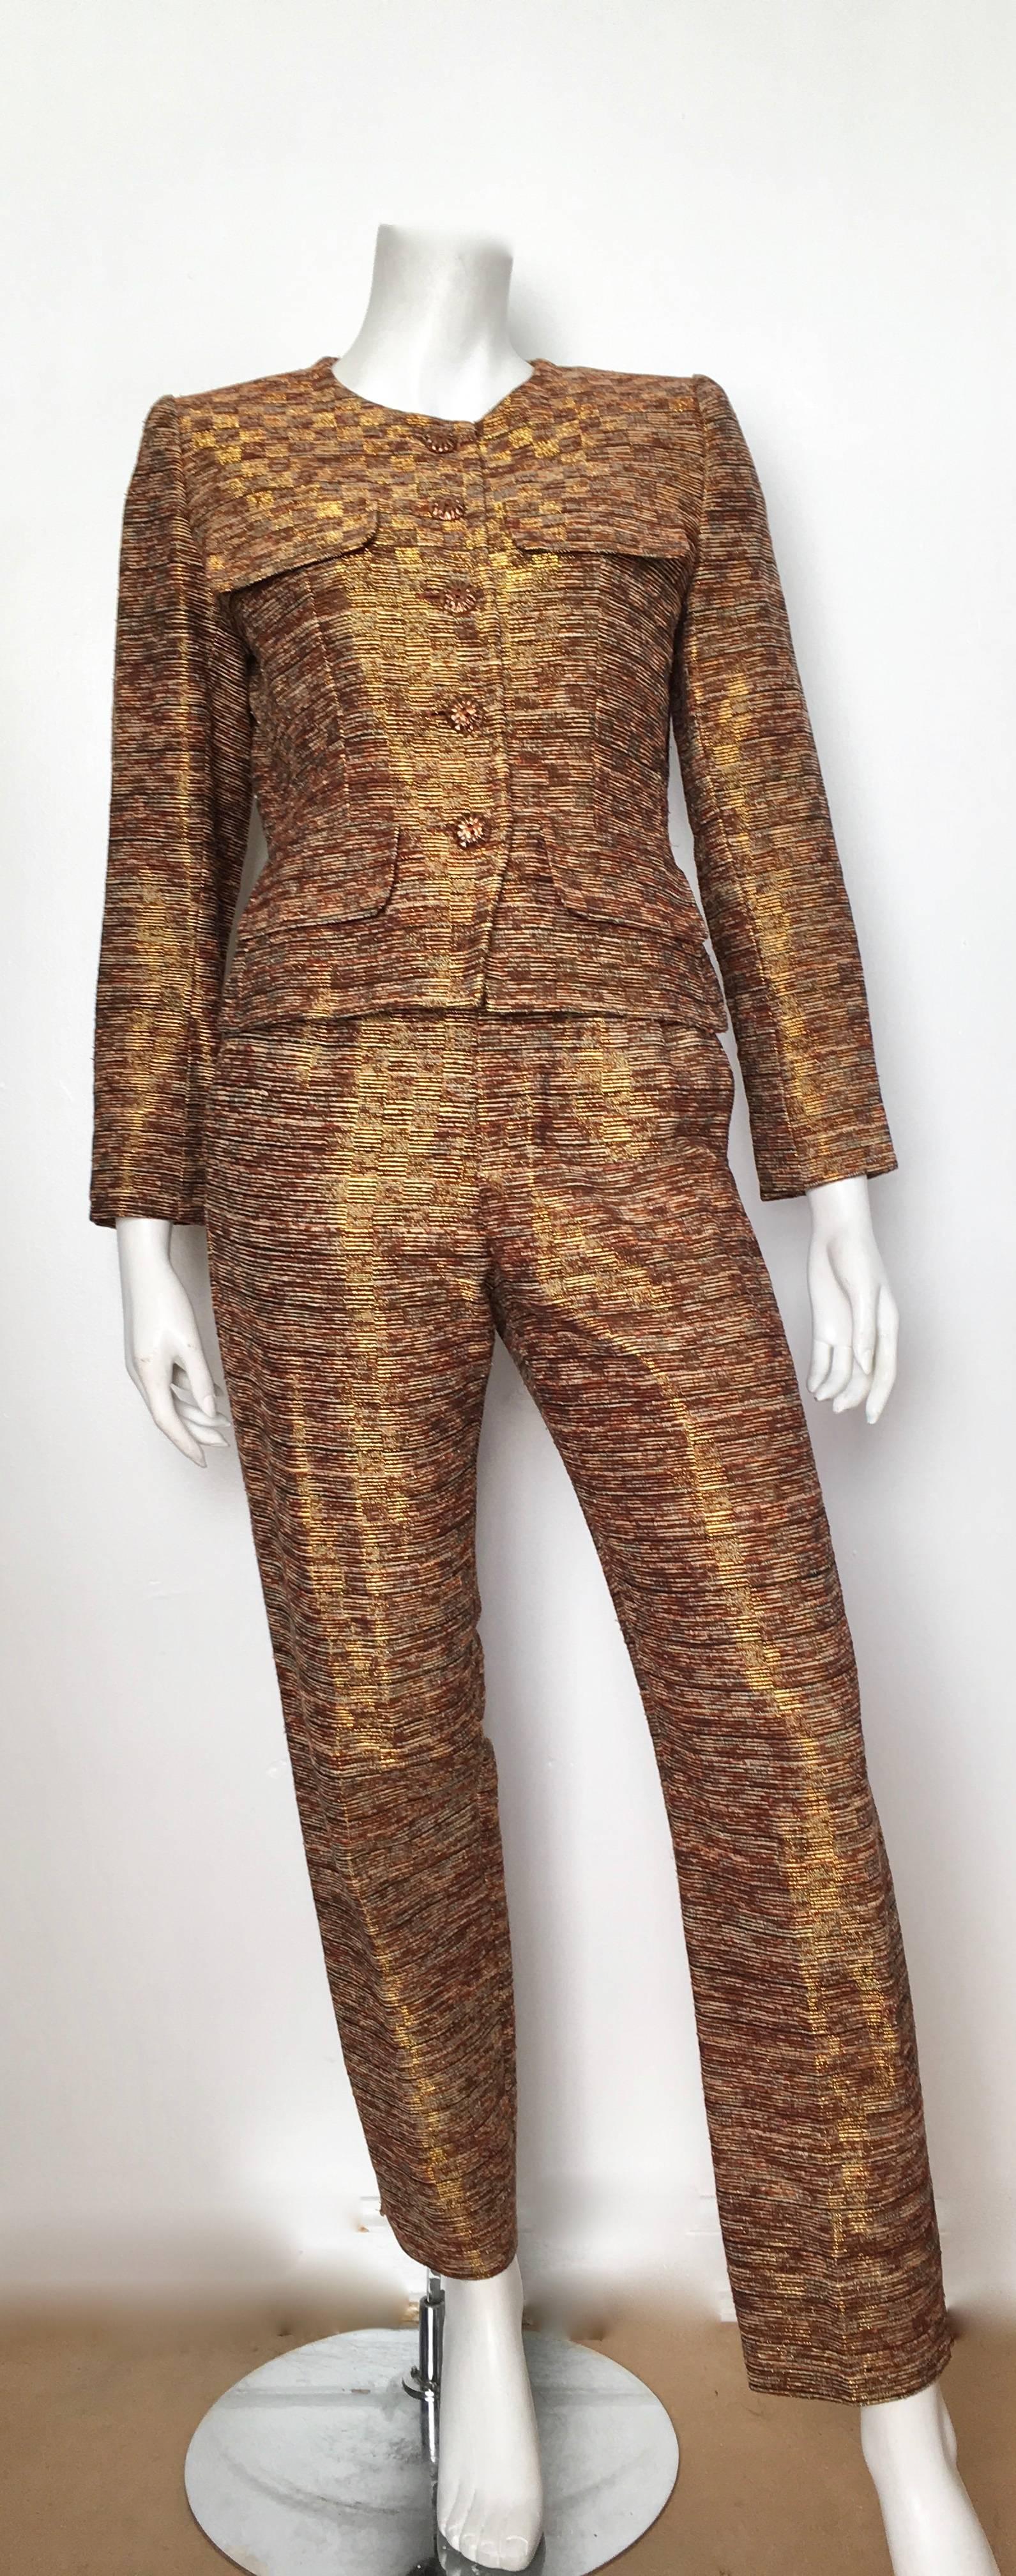 Yves Saint Laurent Rive Gauche 1980s gold / bronze silk jacket & pant suit is a French size 36 and fits a size 4. Luxurious tapestry fabric YSL 1980s pant suit is just as powerful today as when it was first designed. Jacket is fully lined, the pants